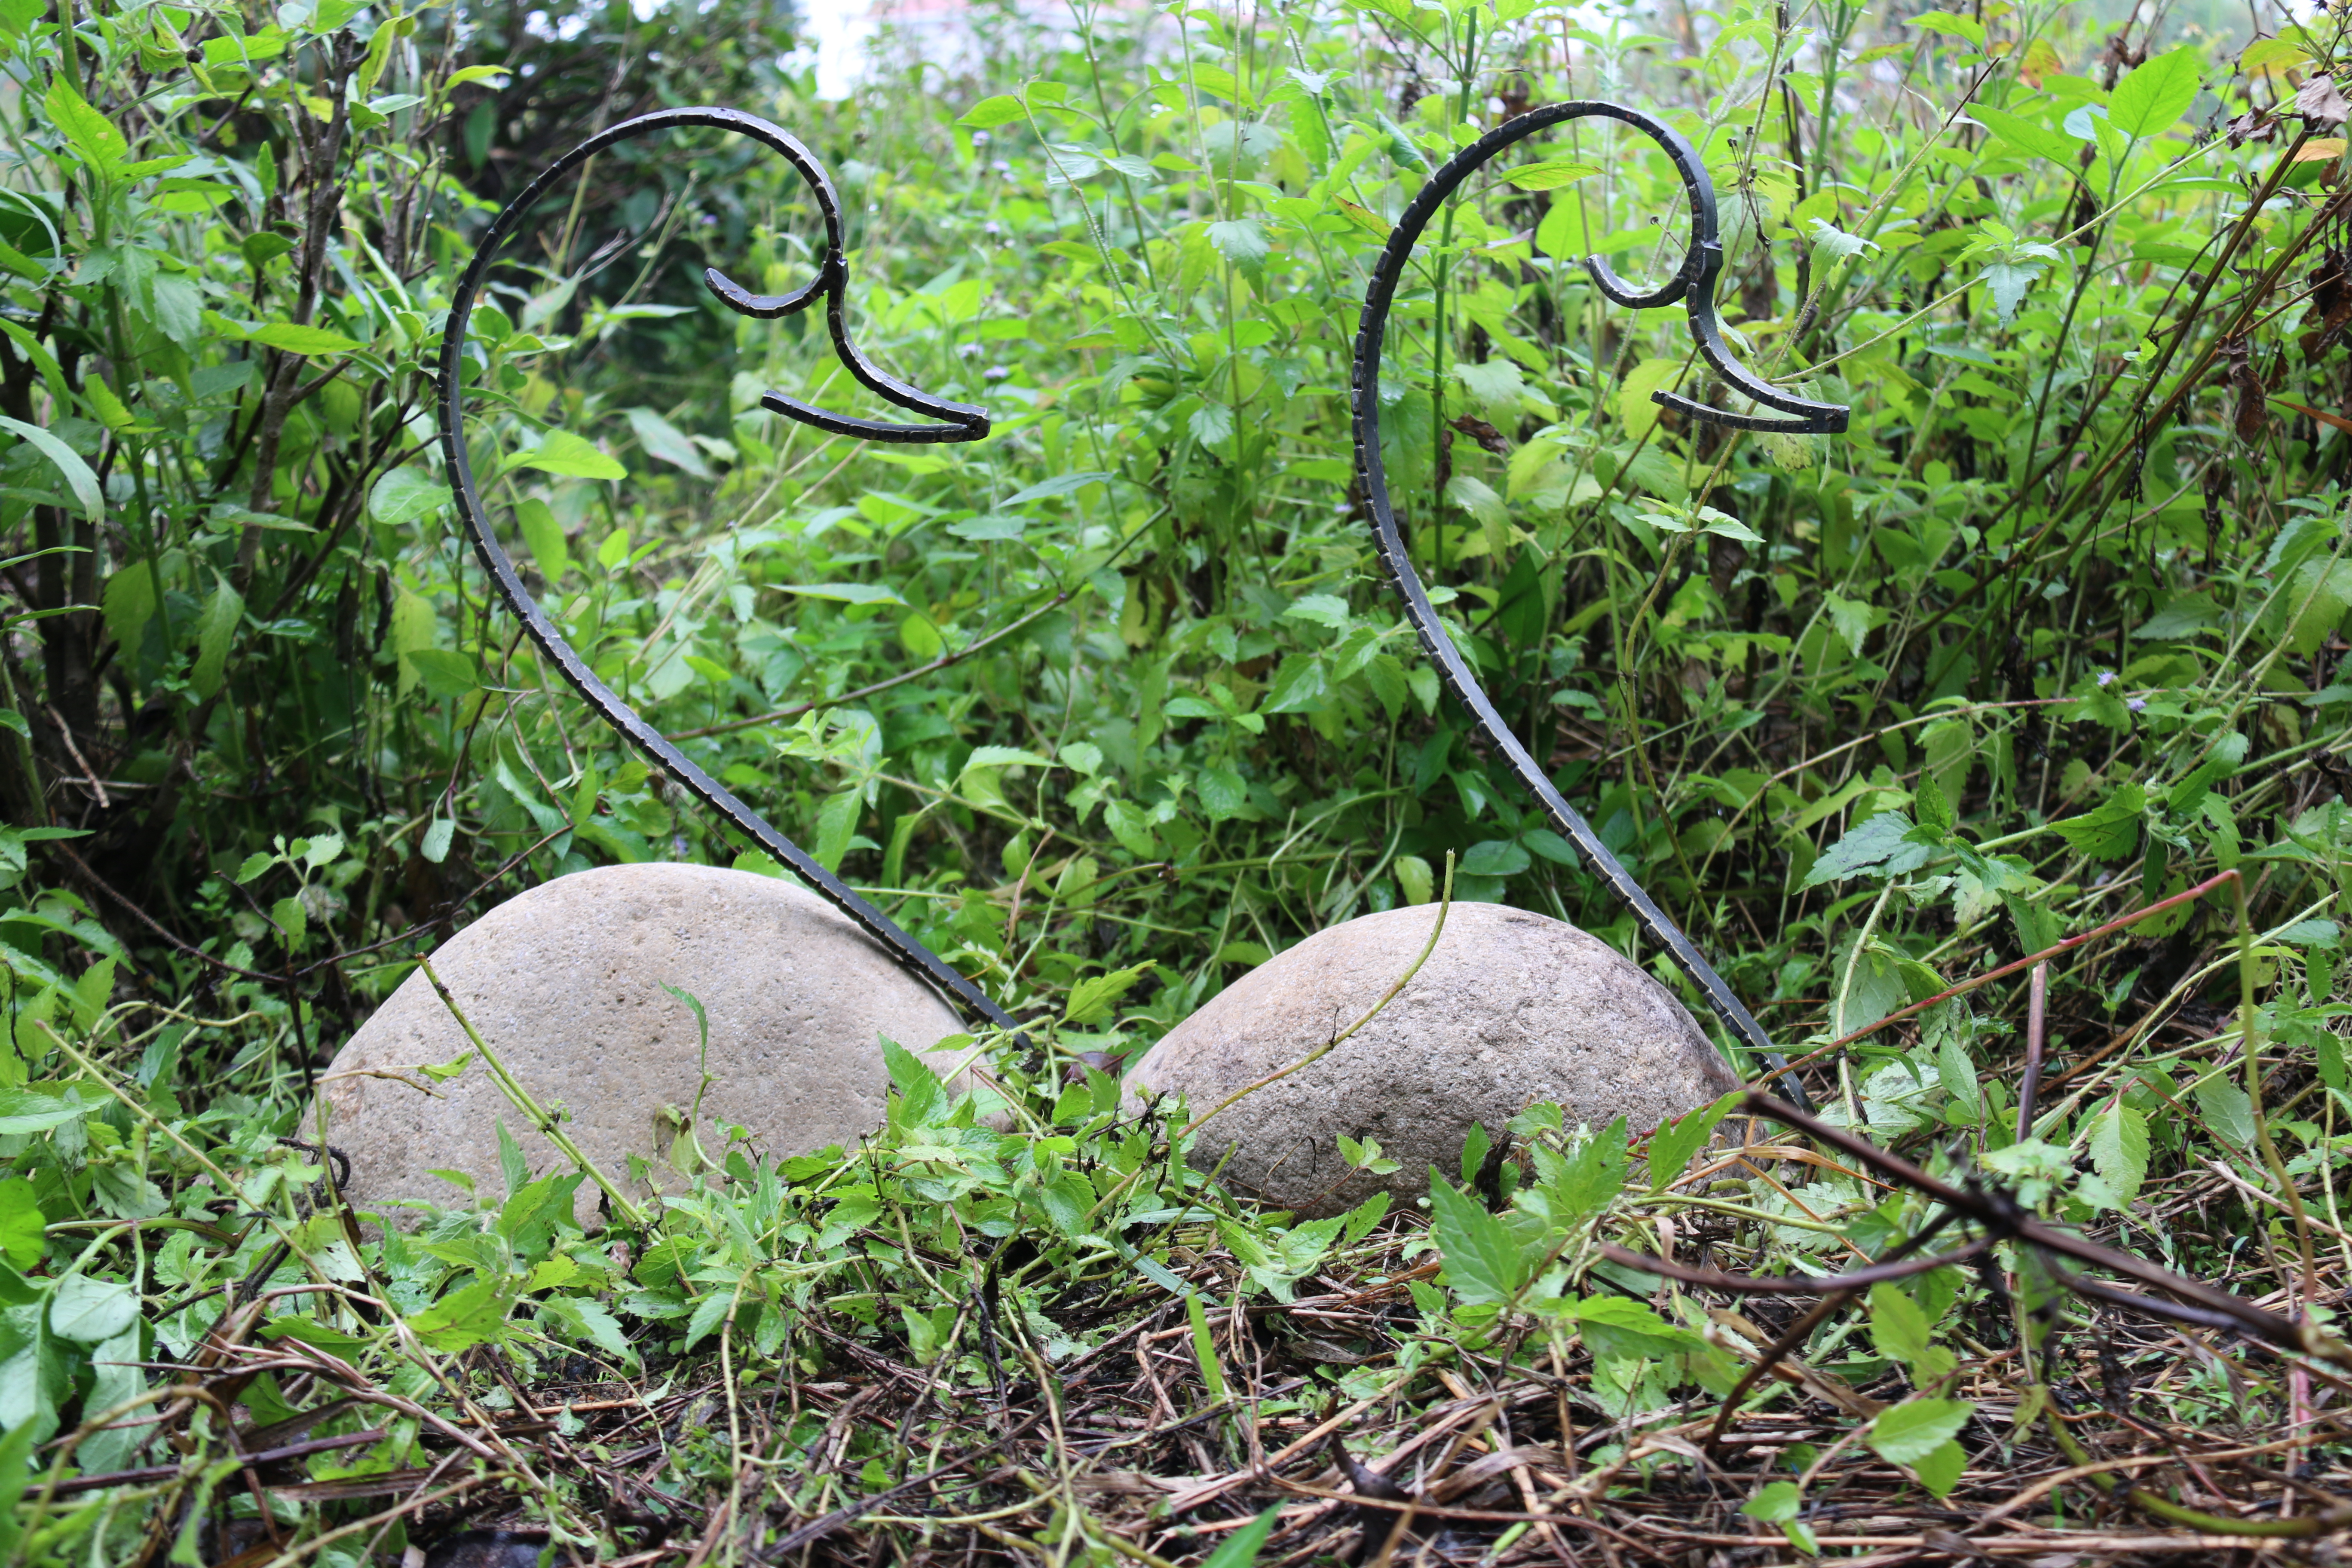 Did you place the stone carved animal in your garden?